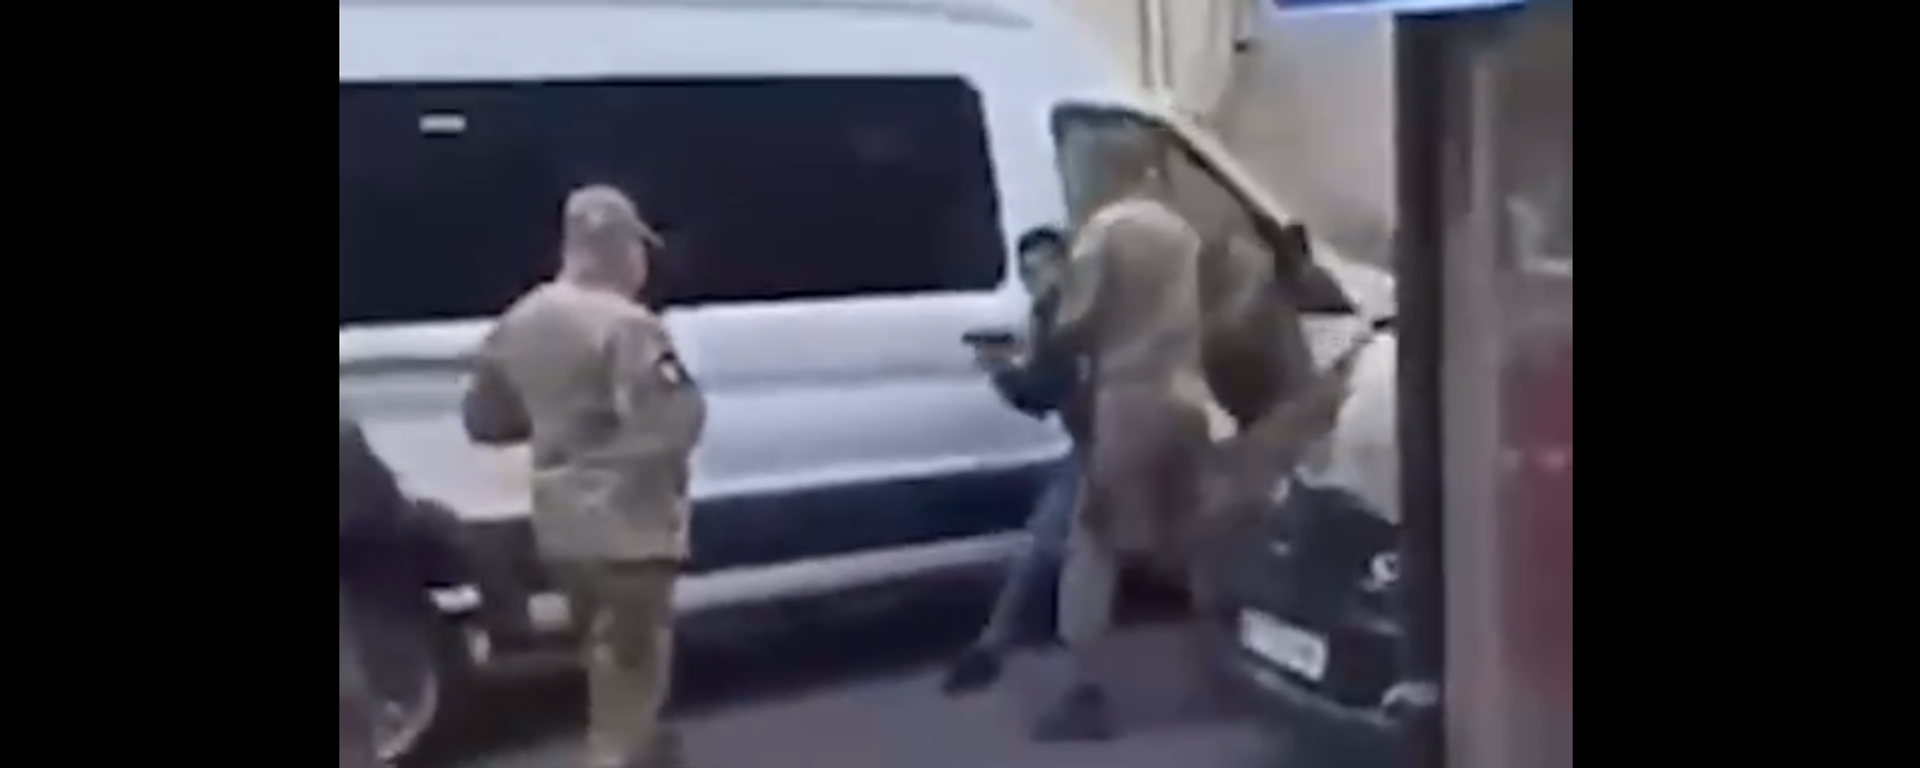 Ukrainian military commissars grab and assault men in the city of Ternopol amid a new round of mobilization, a video on social media appears to show. The conscripts are heard expressing their shock and outrage over this coercive treatment. - Sputnik International, 1920, 23.06.2023